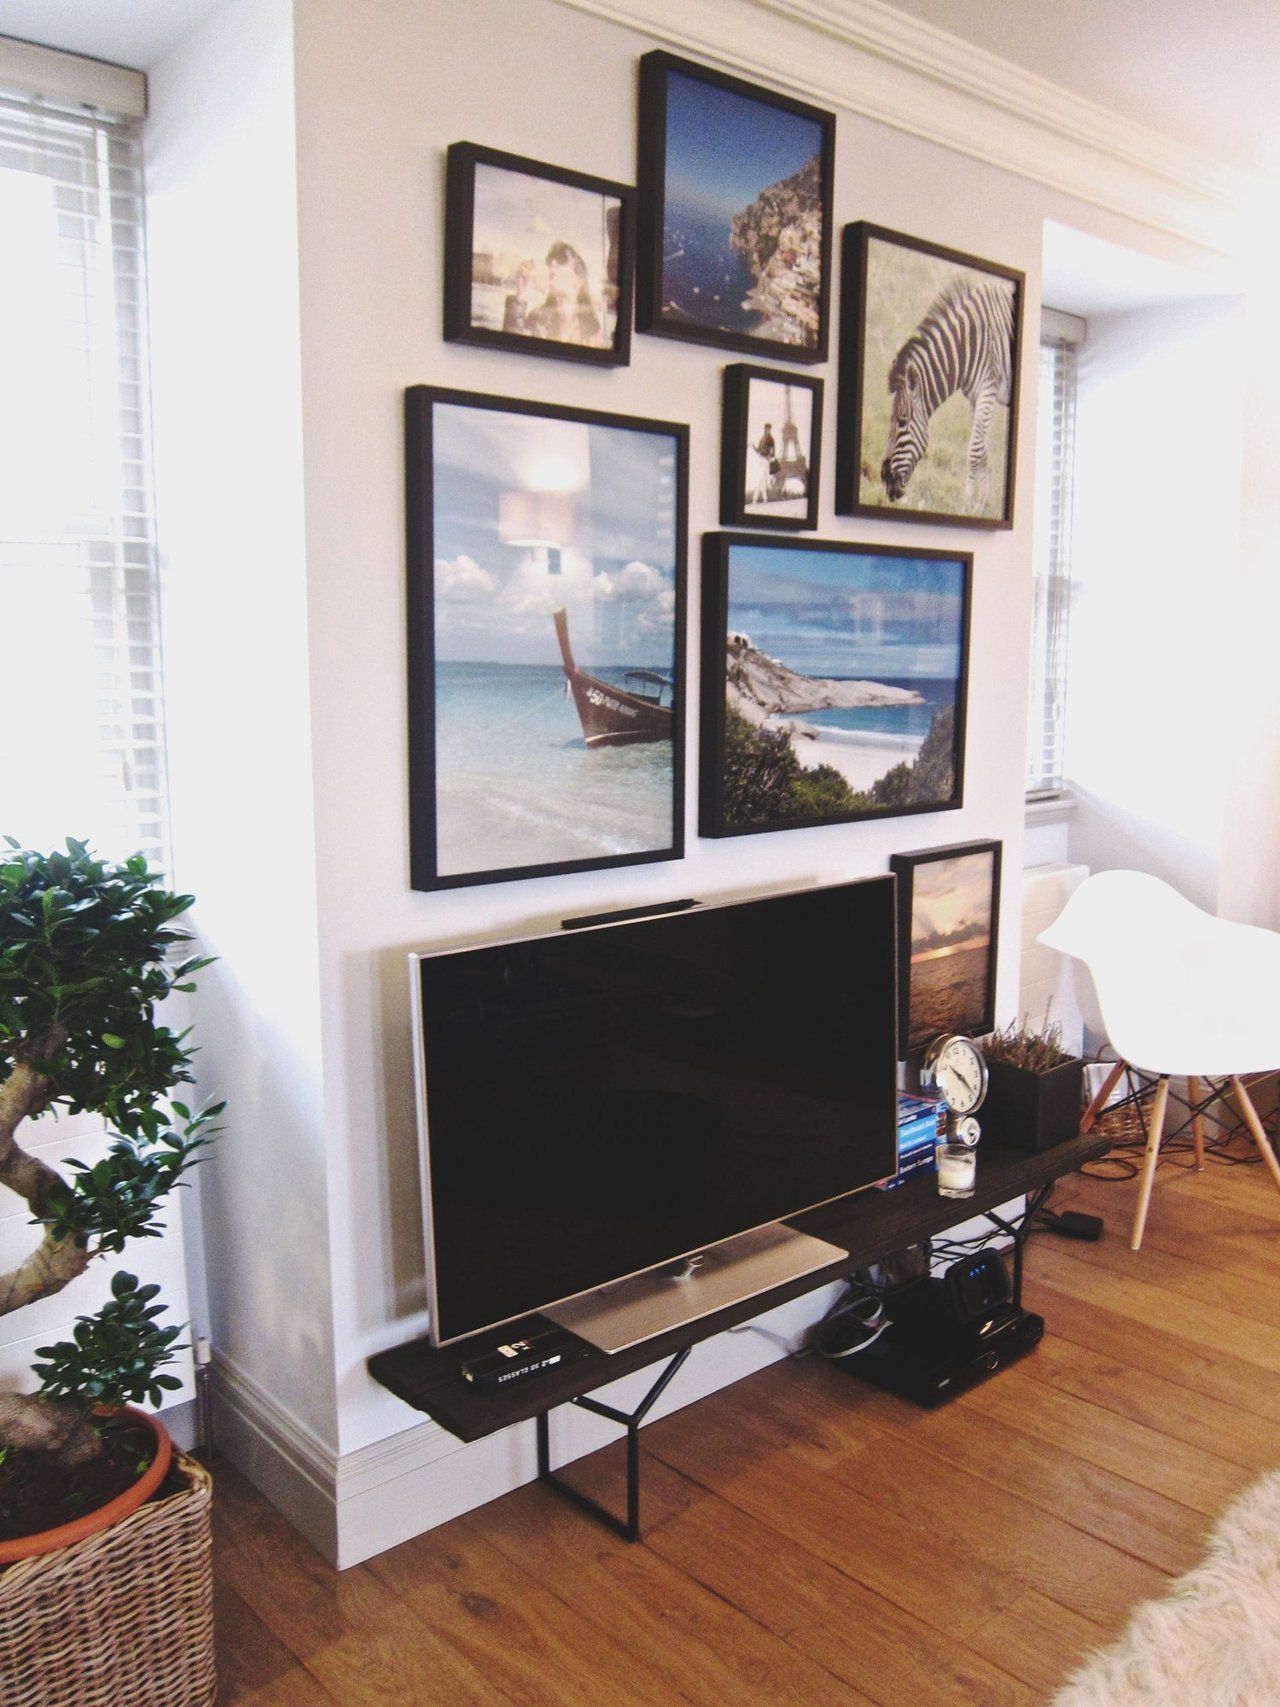 Alison's Sophisticated And Posh London Home | Home, House Throughout Tall Skinny Tv Stands (View 15 of 15)